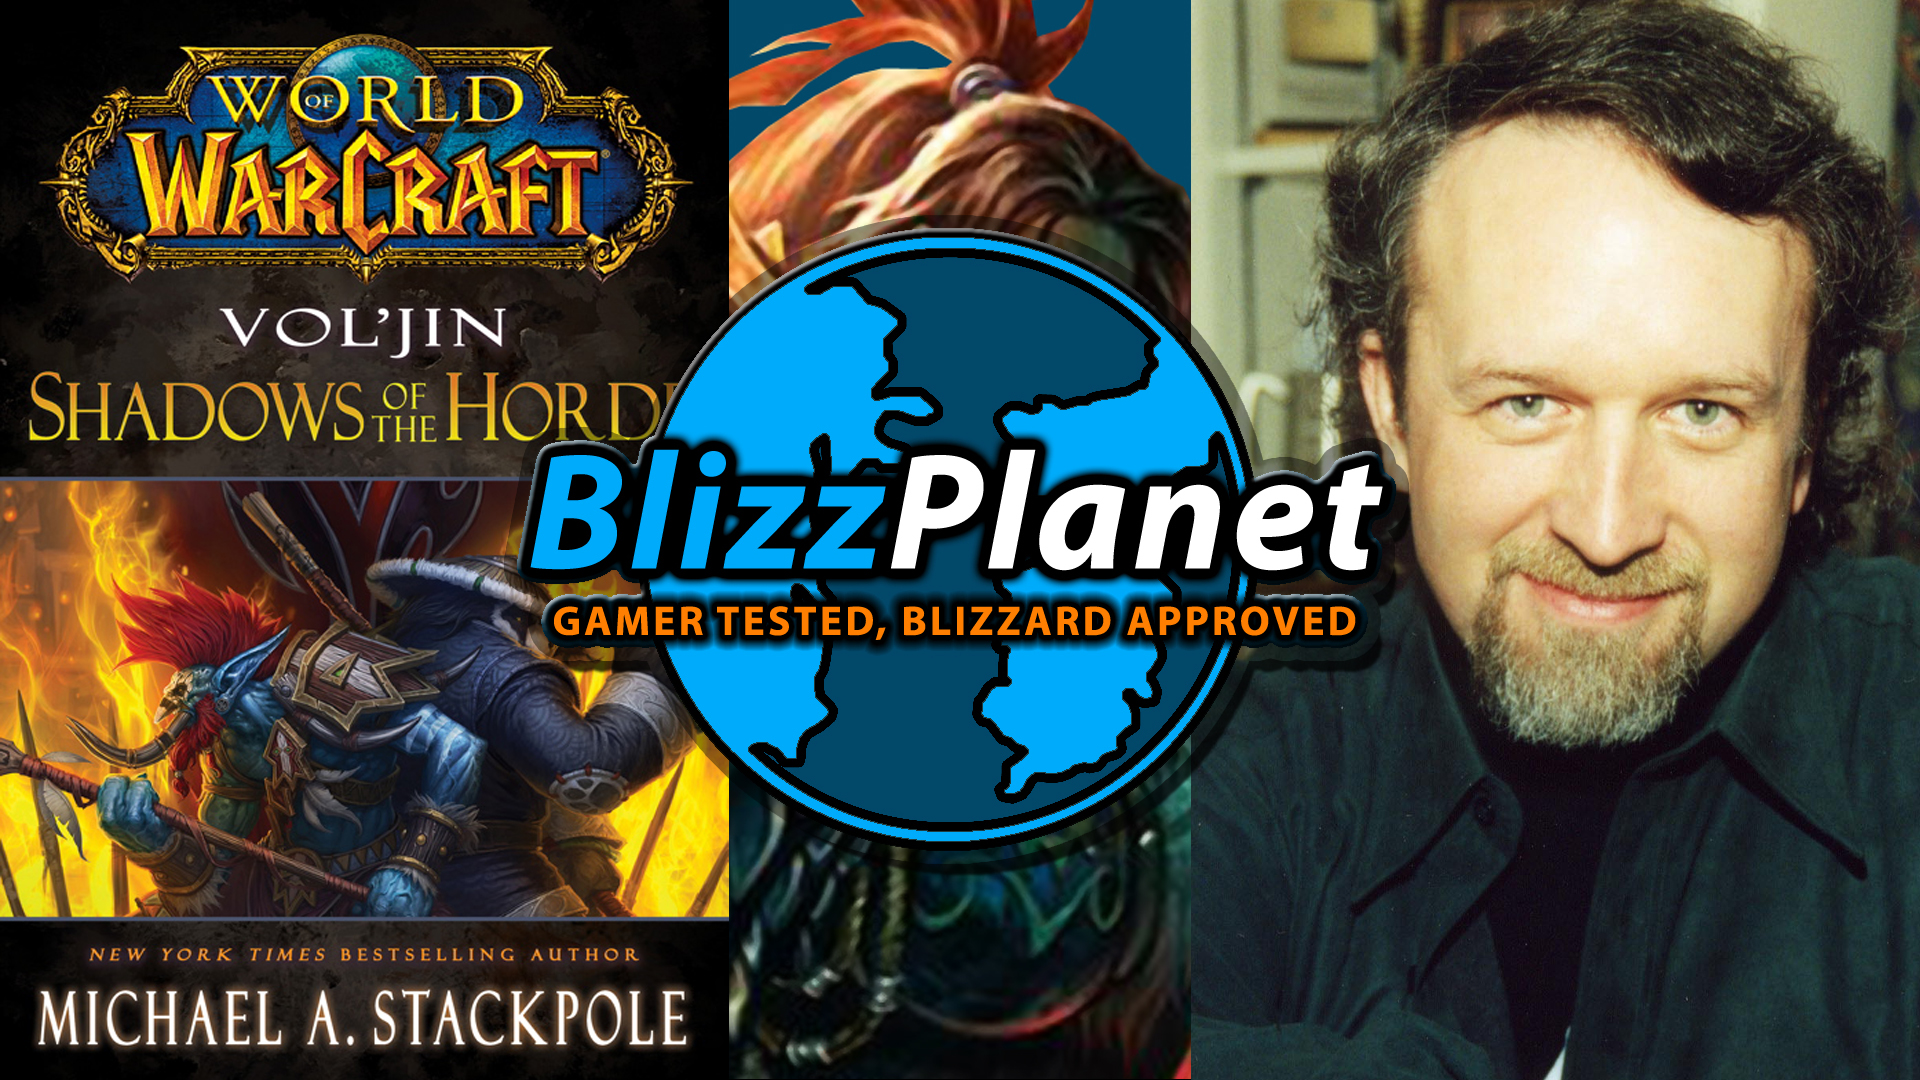 SDCC 2013 Interview – Mike Stackpole on World of Warcraft: Vol’jin, Shadows of the Horde